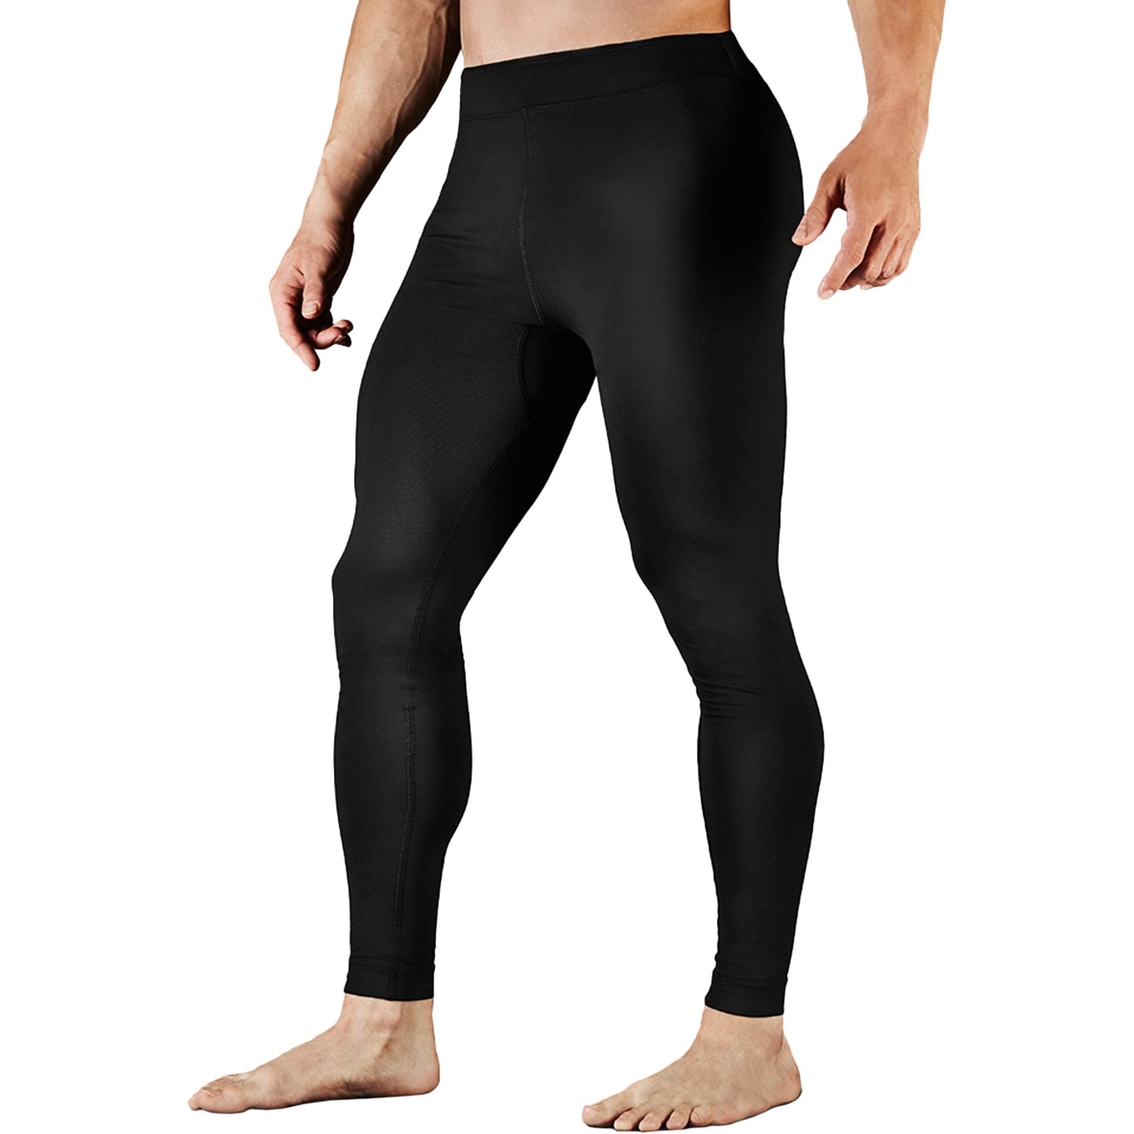 Tommie Copper Running Tights, Pants, Clothing & Accessories